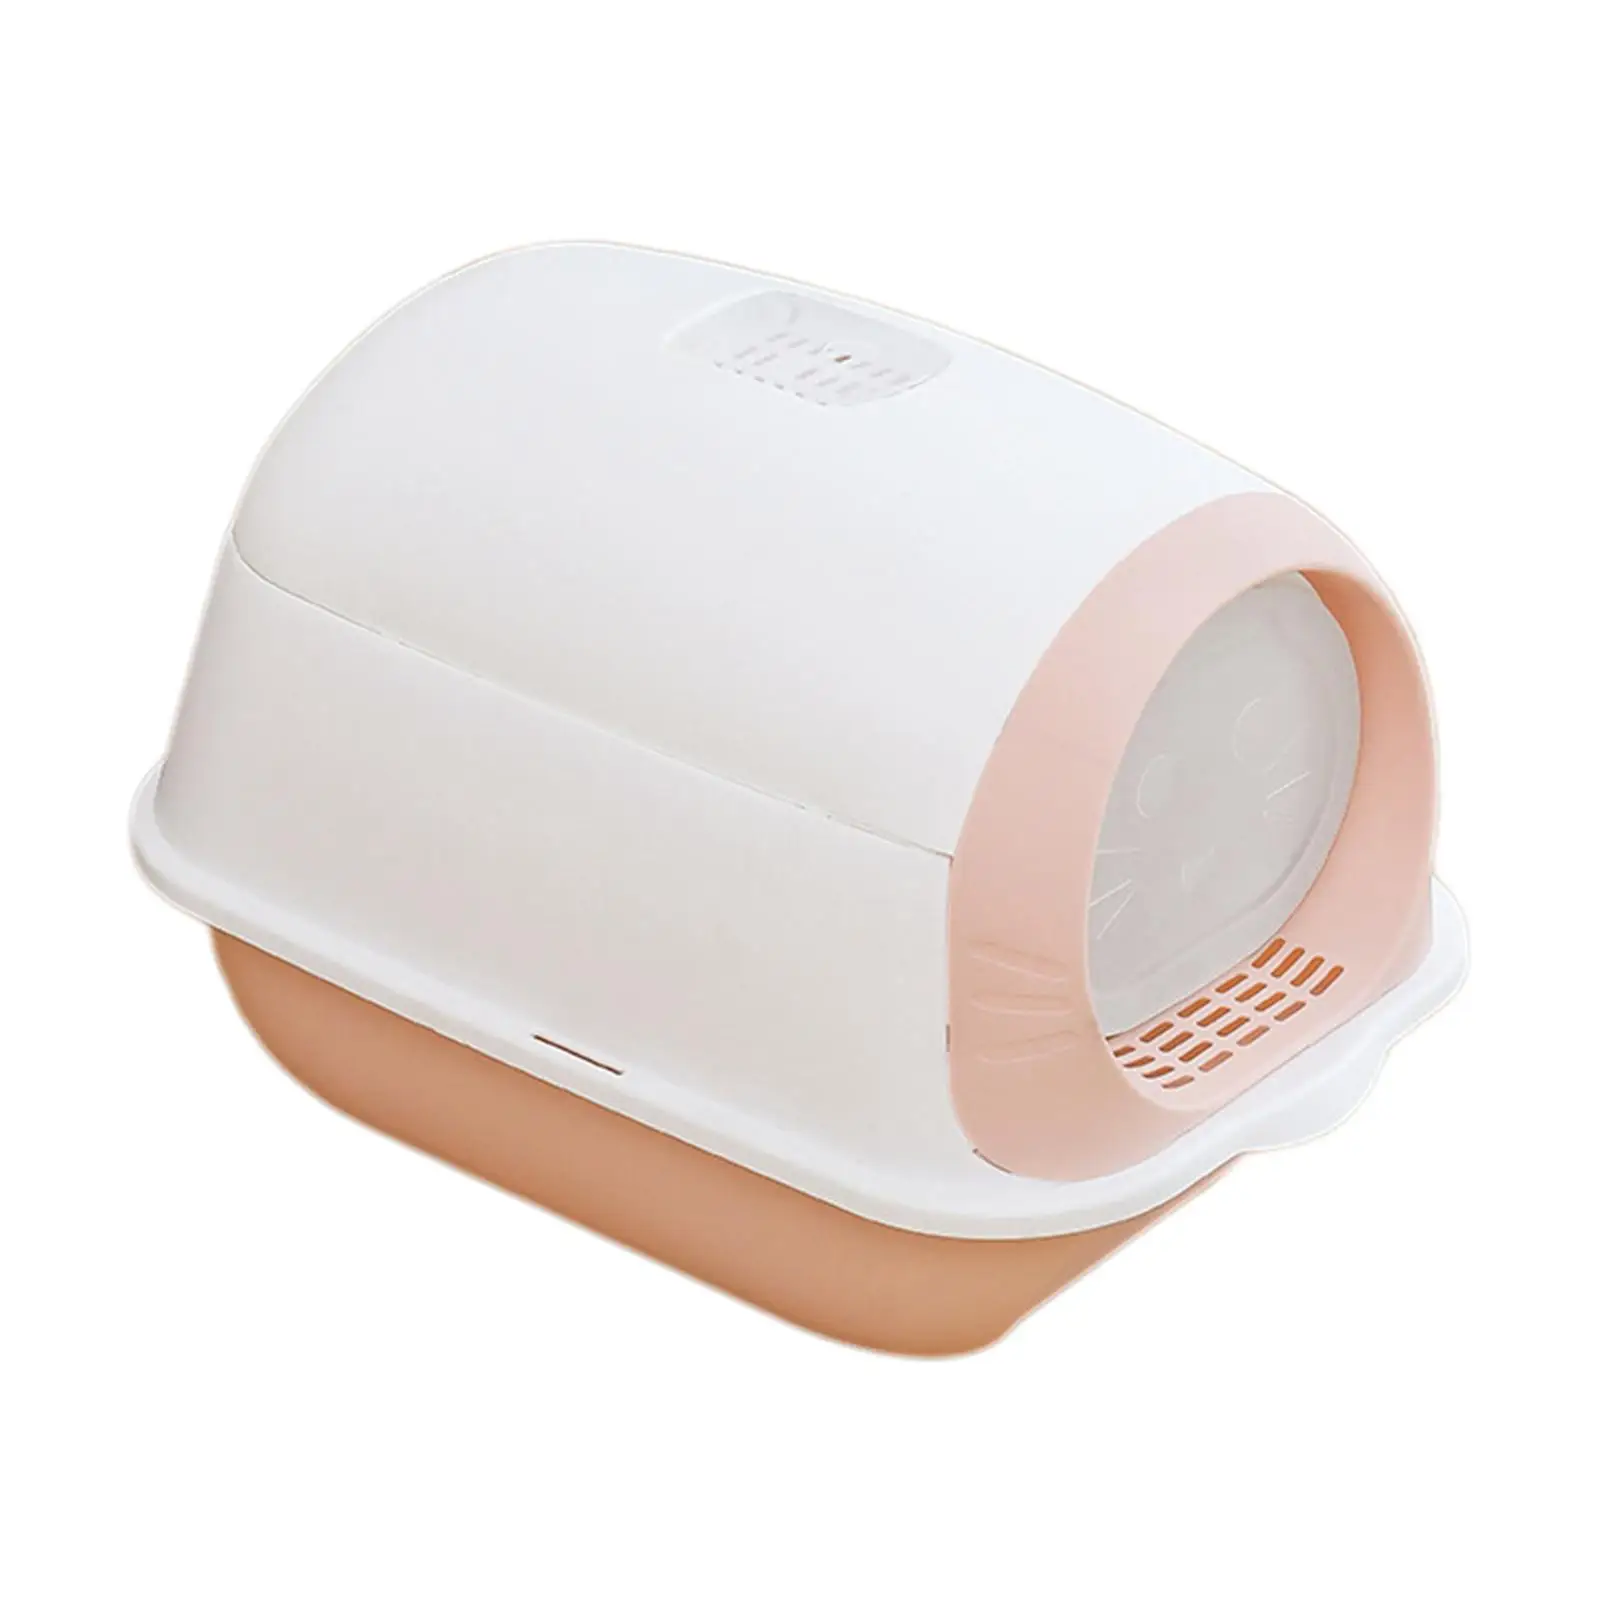 Pet Litter Tray Enclosed Potty Toilet with Gate Deep Loo Litter Pan Hooded Cat Litter Box for Rabbit Puppy Travel Kitten Kitty